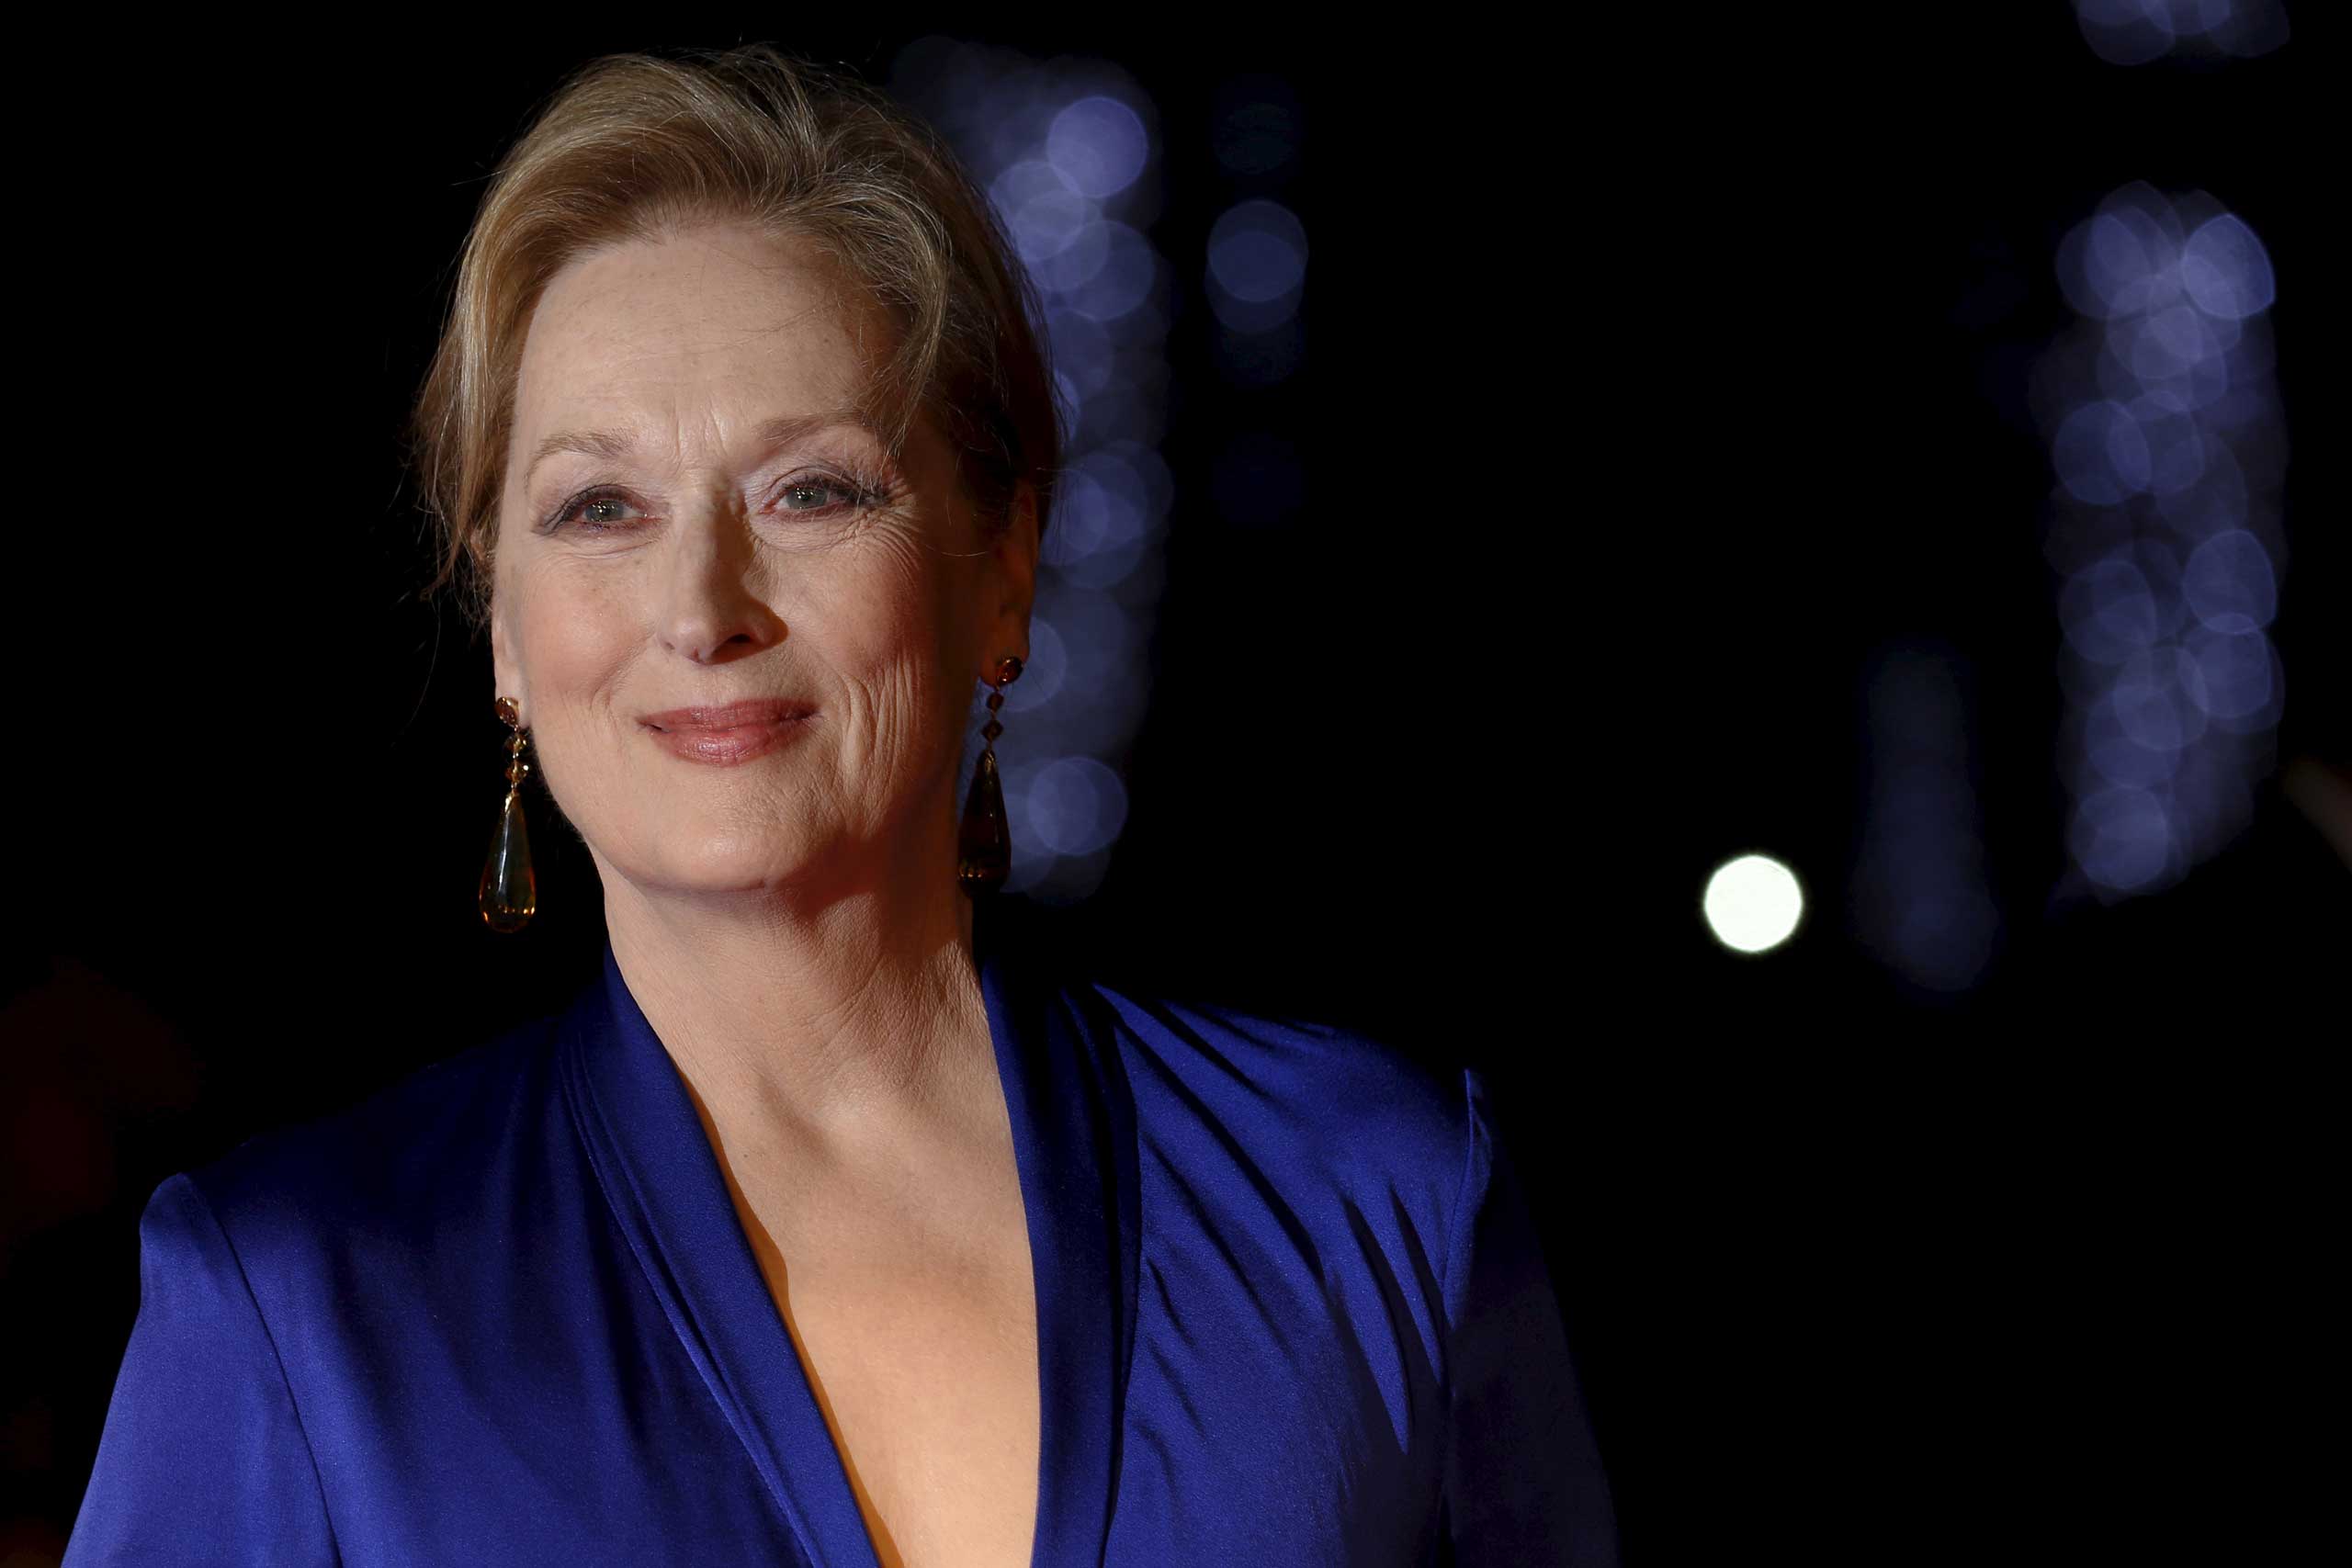 Actress Meryl Streep arrives for the Gala screening of the film "Suffragette" for the opening night of the British Film Institute (BFI) Film Festival at Leicester Square in London Oct. 7, 2015. (Luke MacGregor—Reuters)